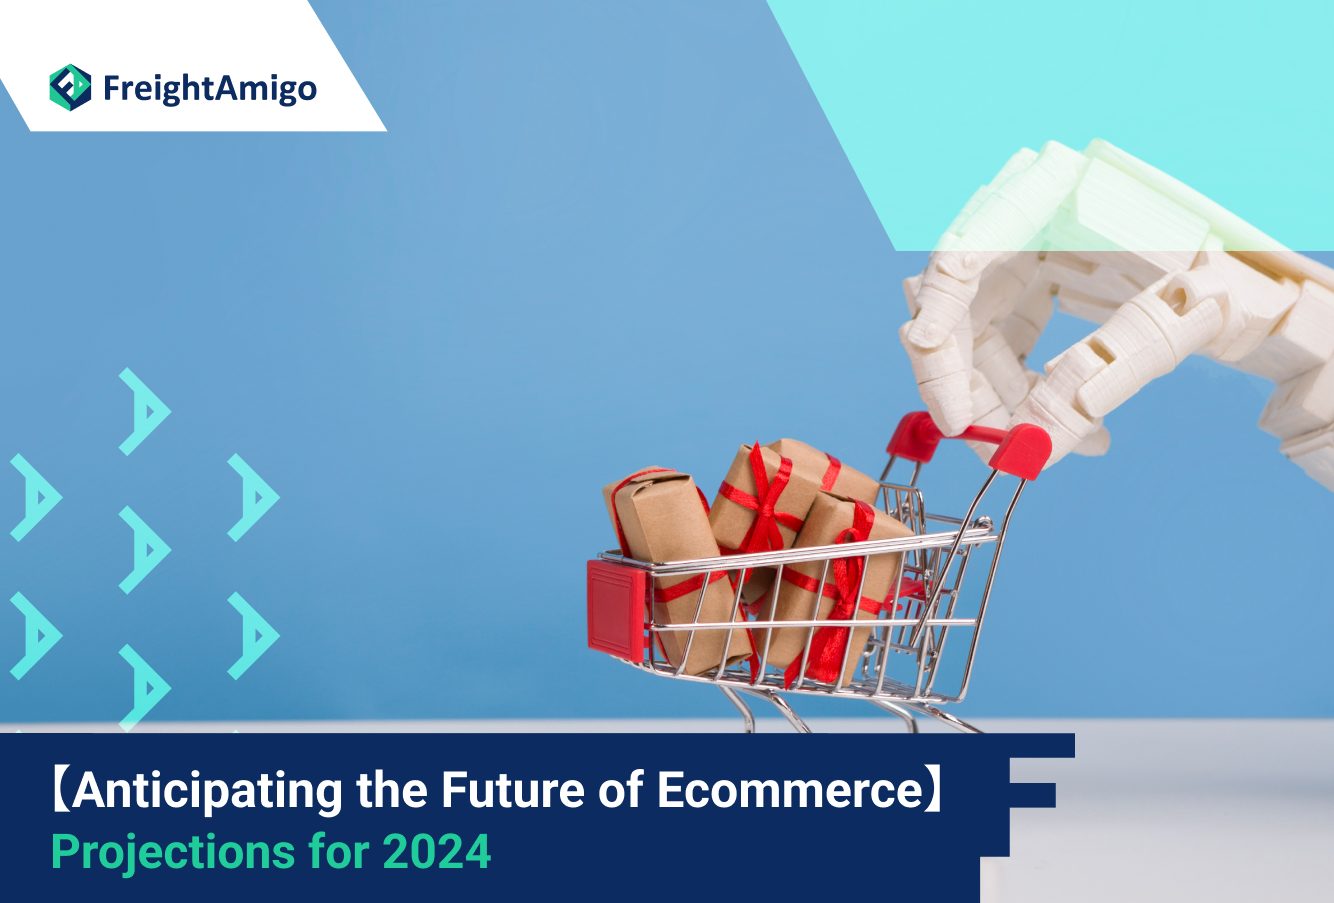 【Anticipating the Future of Ecommerce】 Projections for 2024